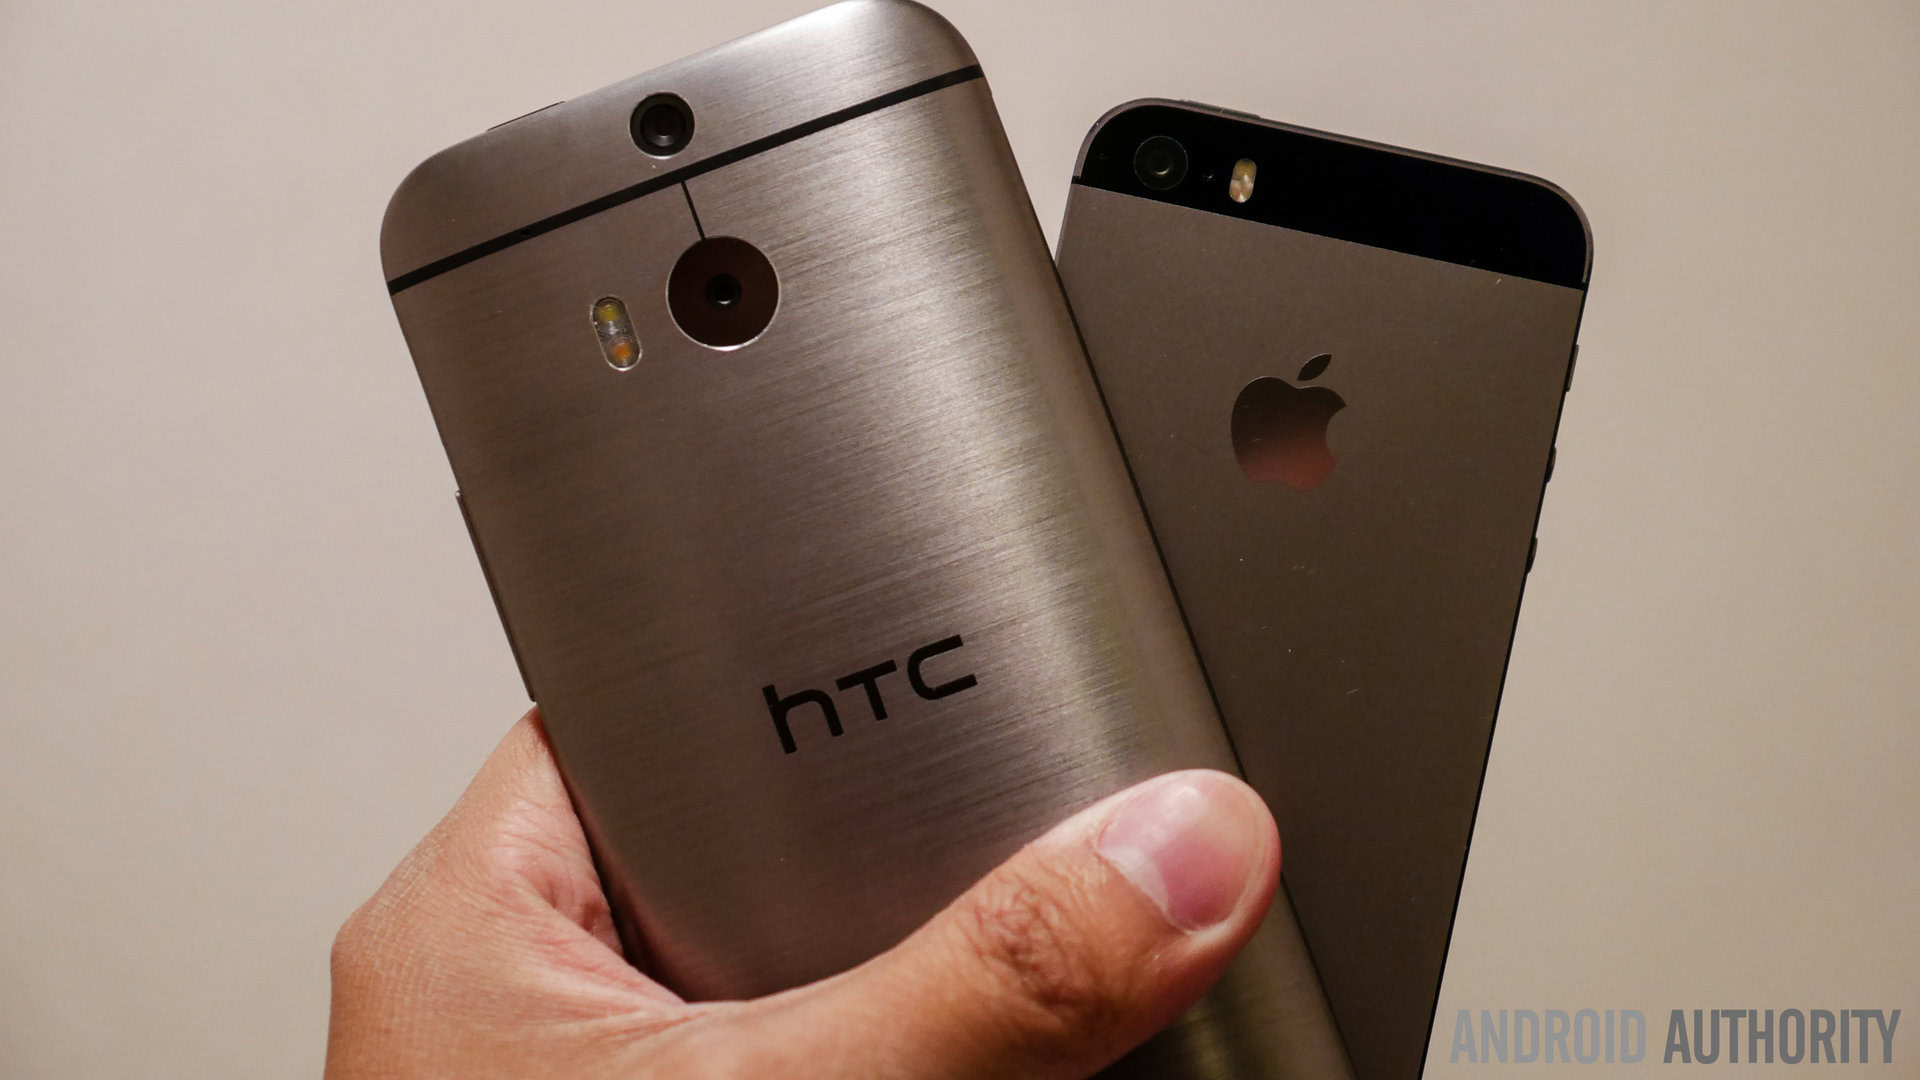 htc one m8 vs iphone 5s quick look aa (10 of 15)